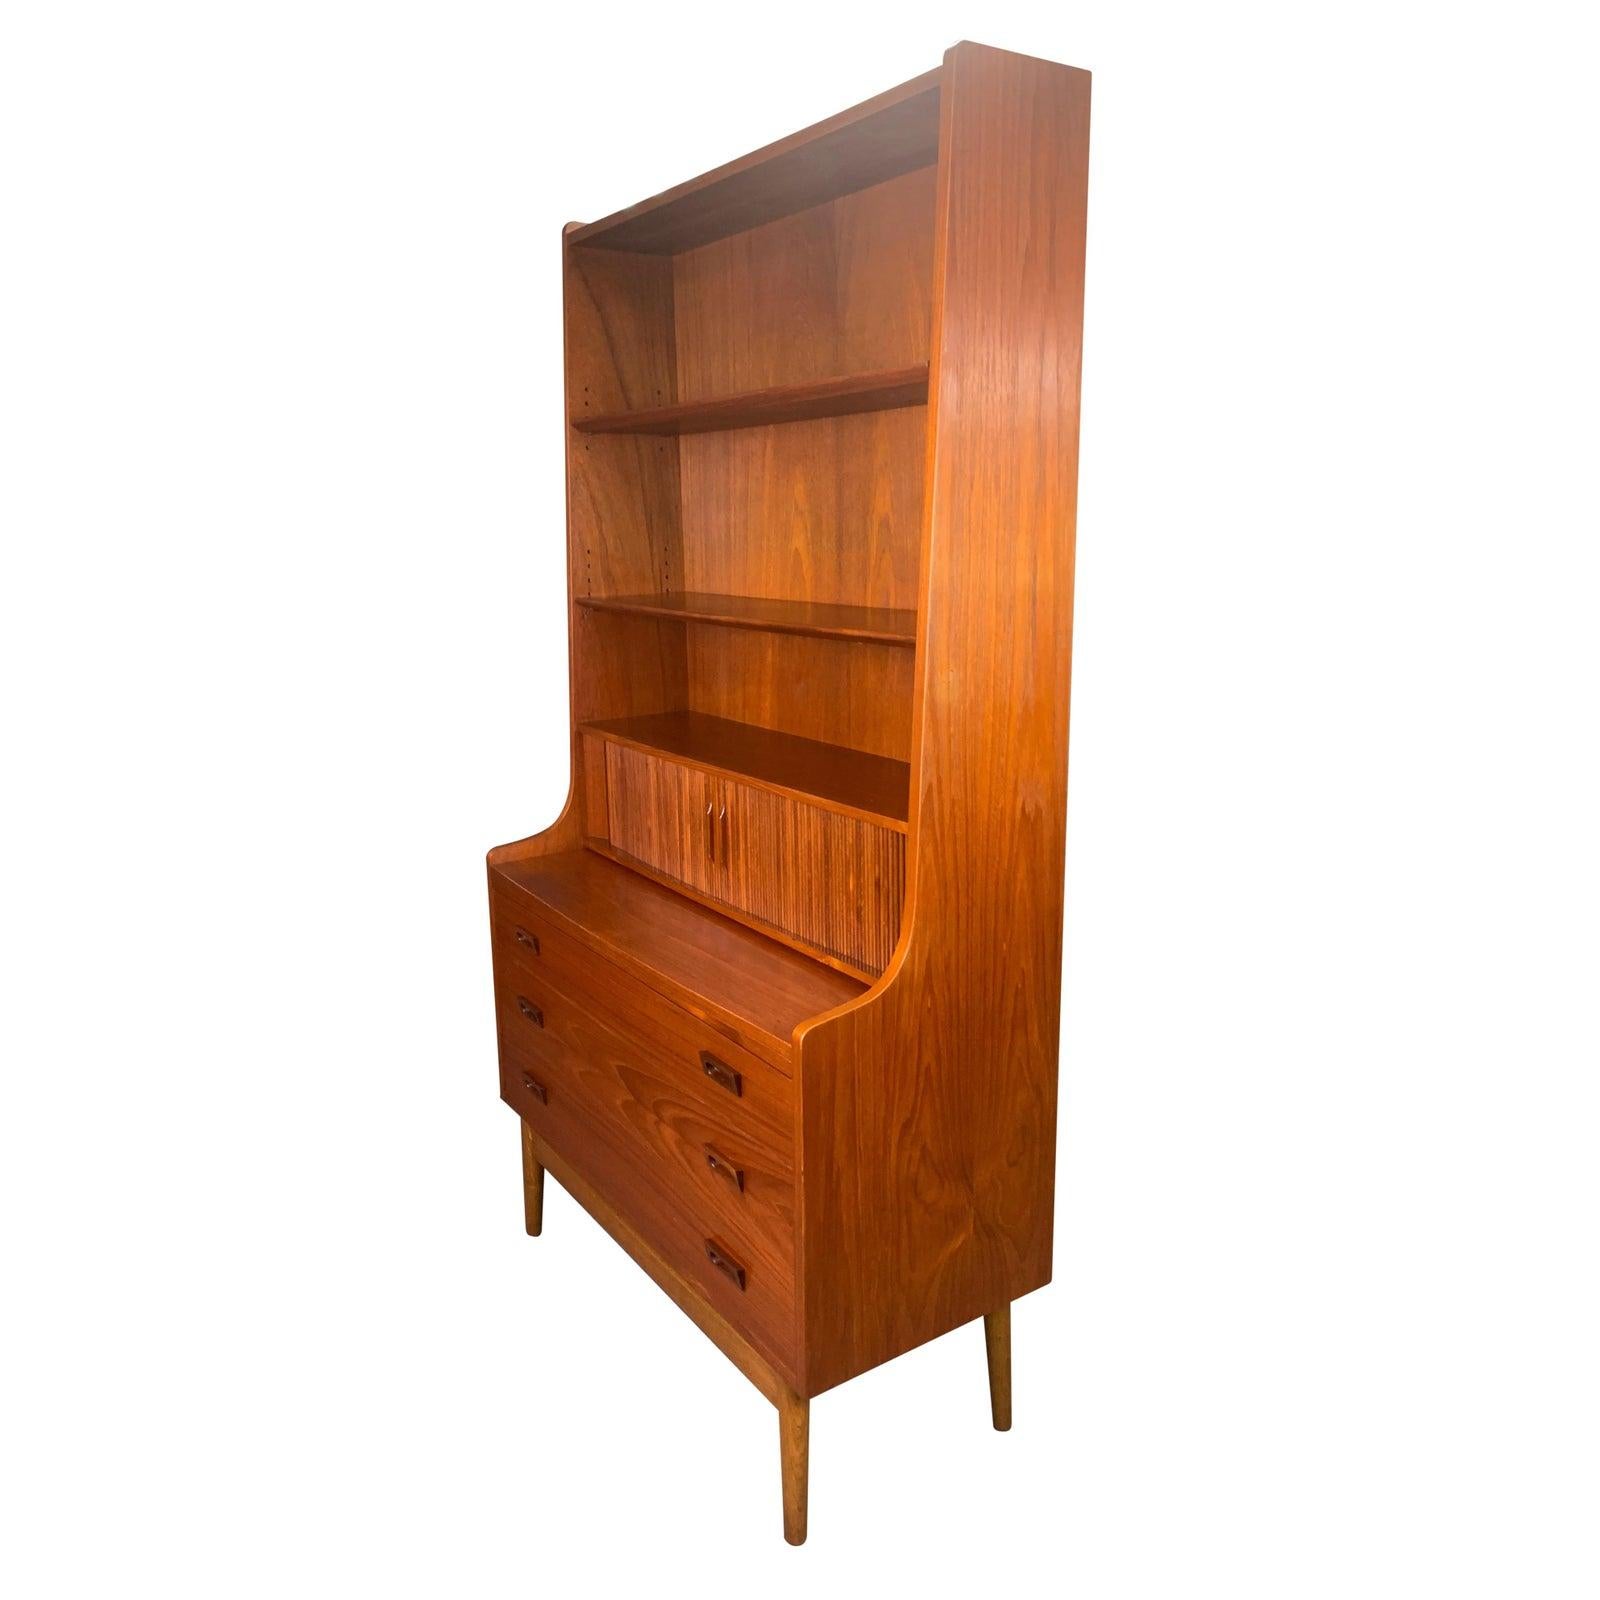 Here is a very sought after Scandinavian Modern teak secretary desk designed by Johannes Sorth for Bornholm Møbelfabrik in Nexø, Denmark in the 1960s. This exquisite piece features in the centre two tambour doors with three small drawers behind them